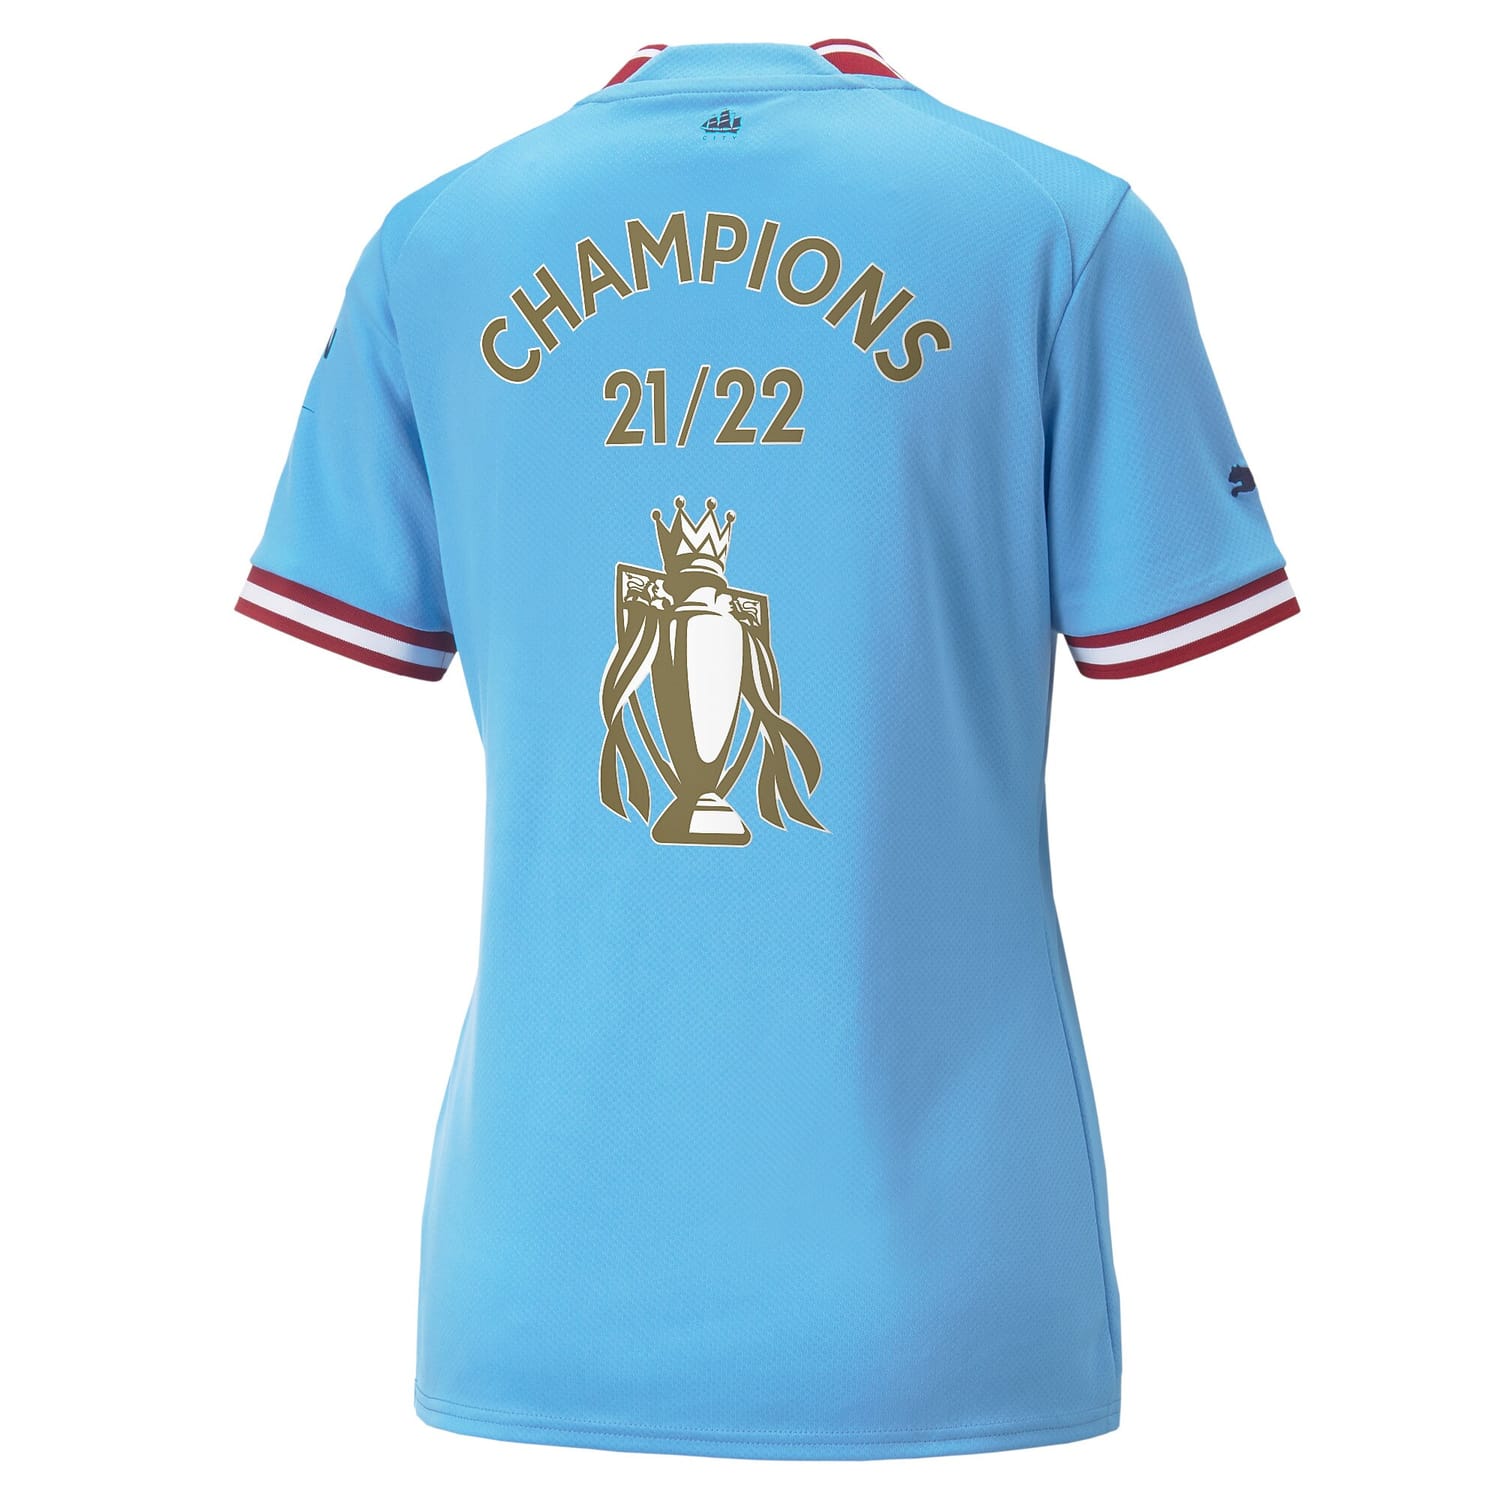 Premier League Champions Manchester City Home Jersey Shirt 2022-23 player Champions 22 printing for Women